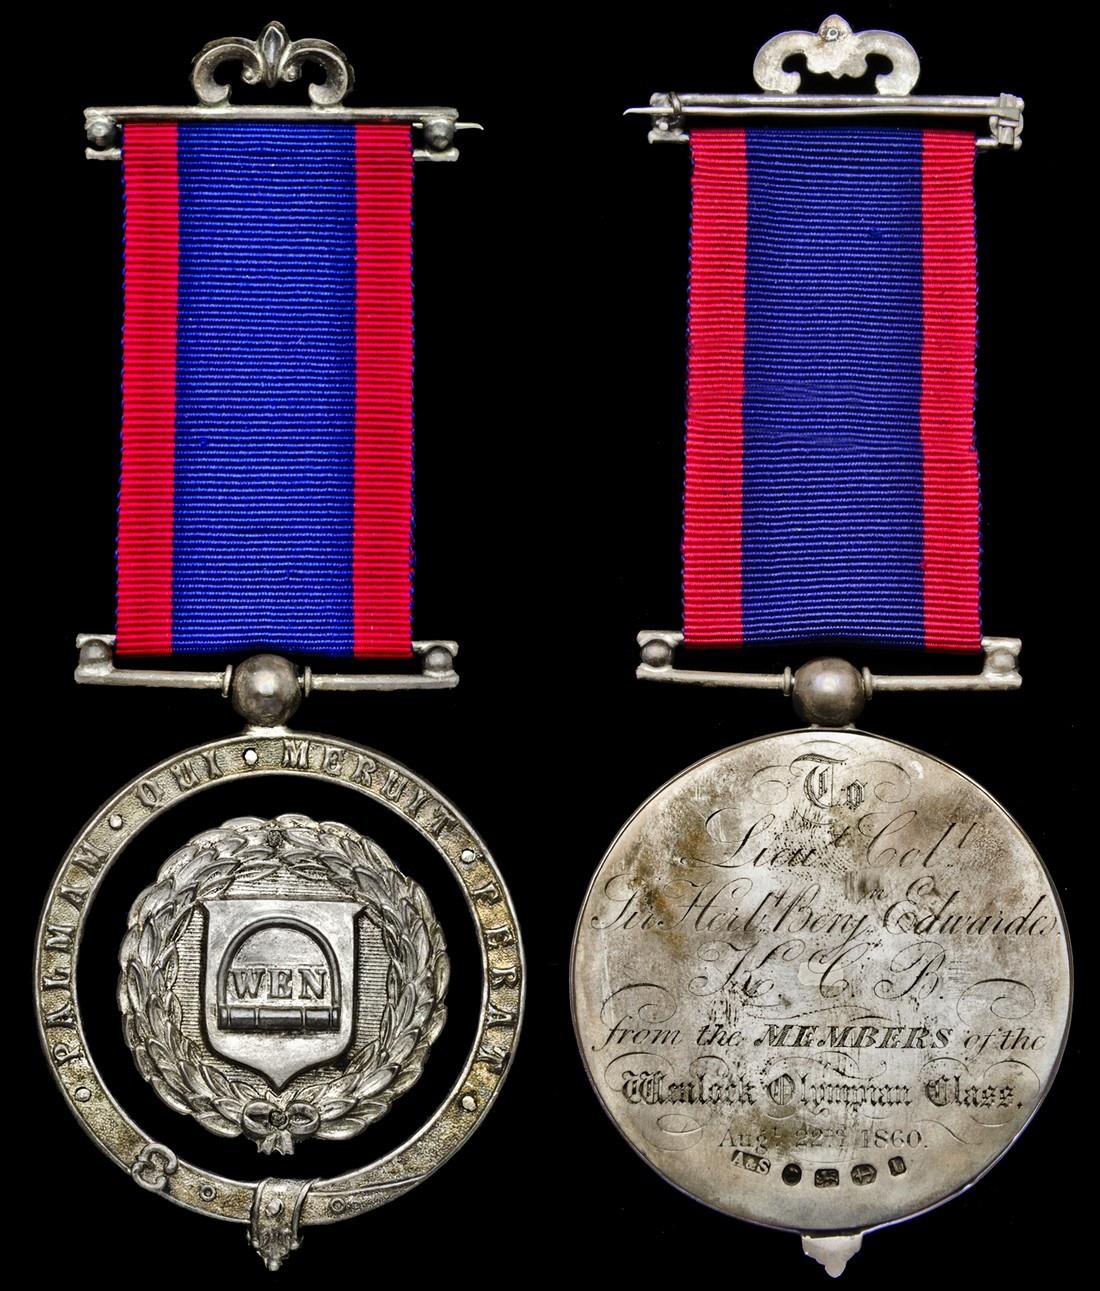 Wenlock Olympic Society Merit Medal, 58mm, silver (Hallmarks for Birmingham 1860), obverse with